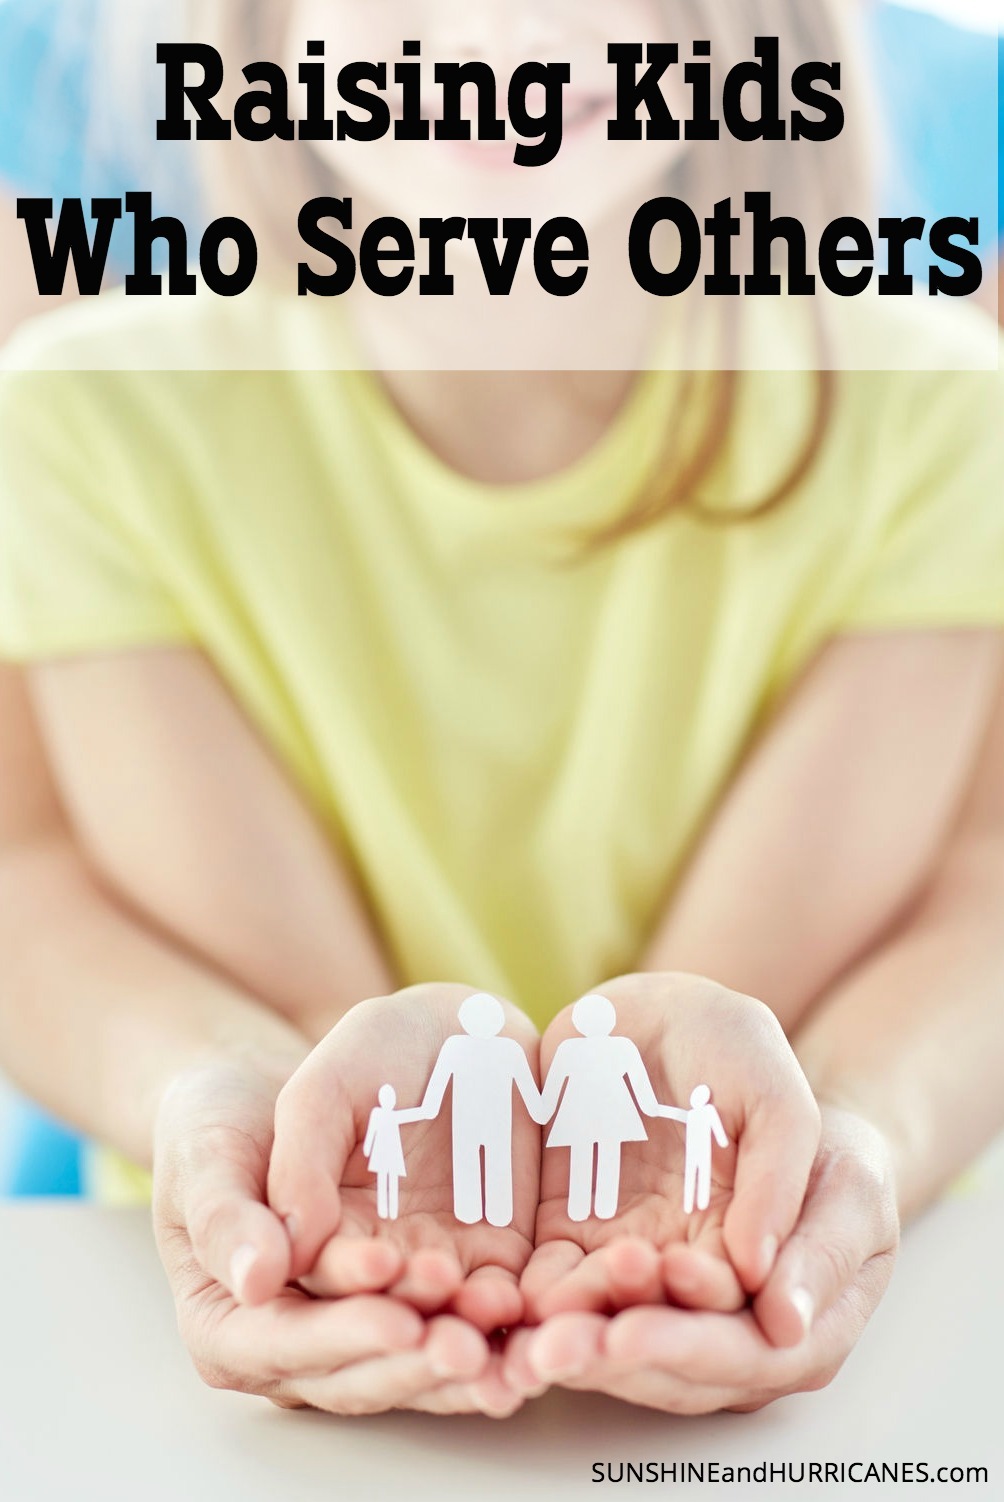 Do you want to raise children that are kind, compassionate and have a passion for helping others? There are many simple ways we can cultivate these traits in our children and help them become people that give back to the world and make a difference in the lives of others. Raising Kids Who Serve Others. SunshineandHurricanes.com